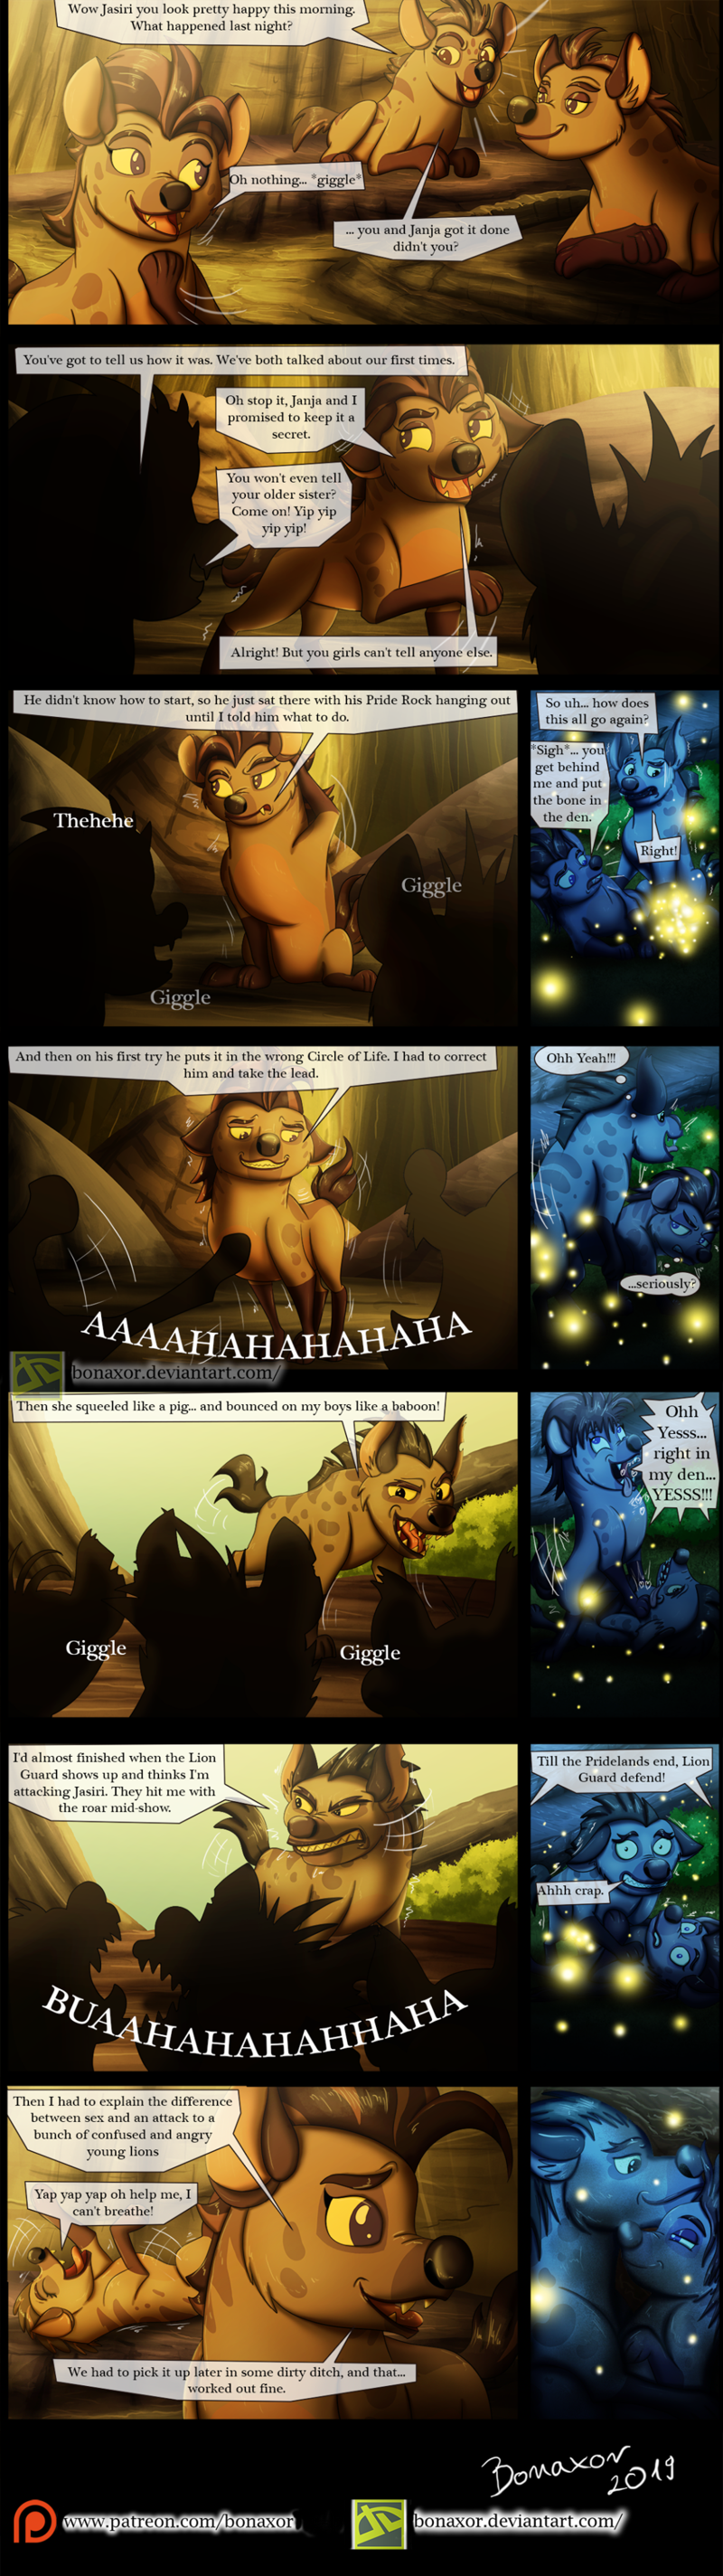 Page 9: Quick Before the Hyena [sex act]s